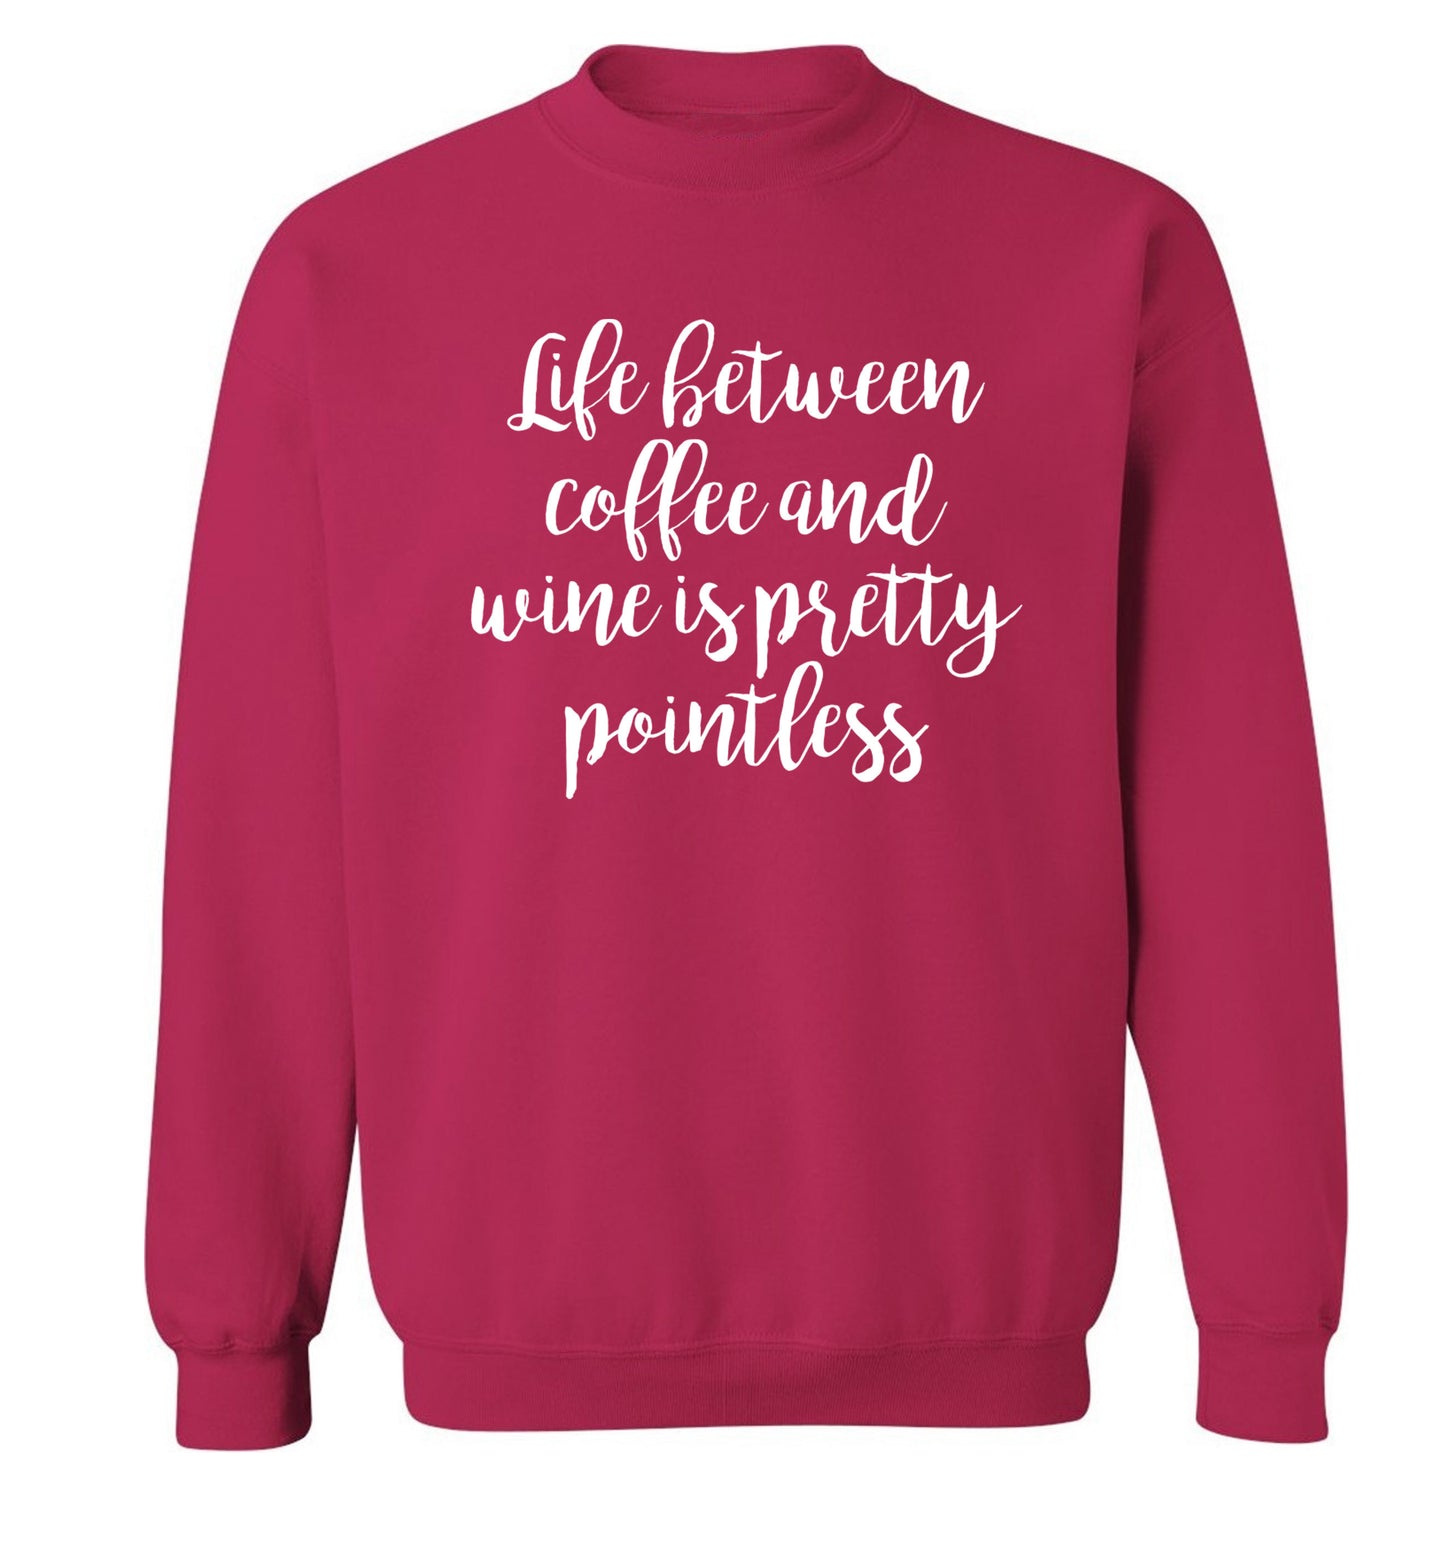 Life between coffee and wine is pretty pointless Adult's unisex pink Sweater 2XL